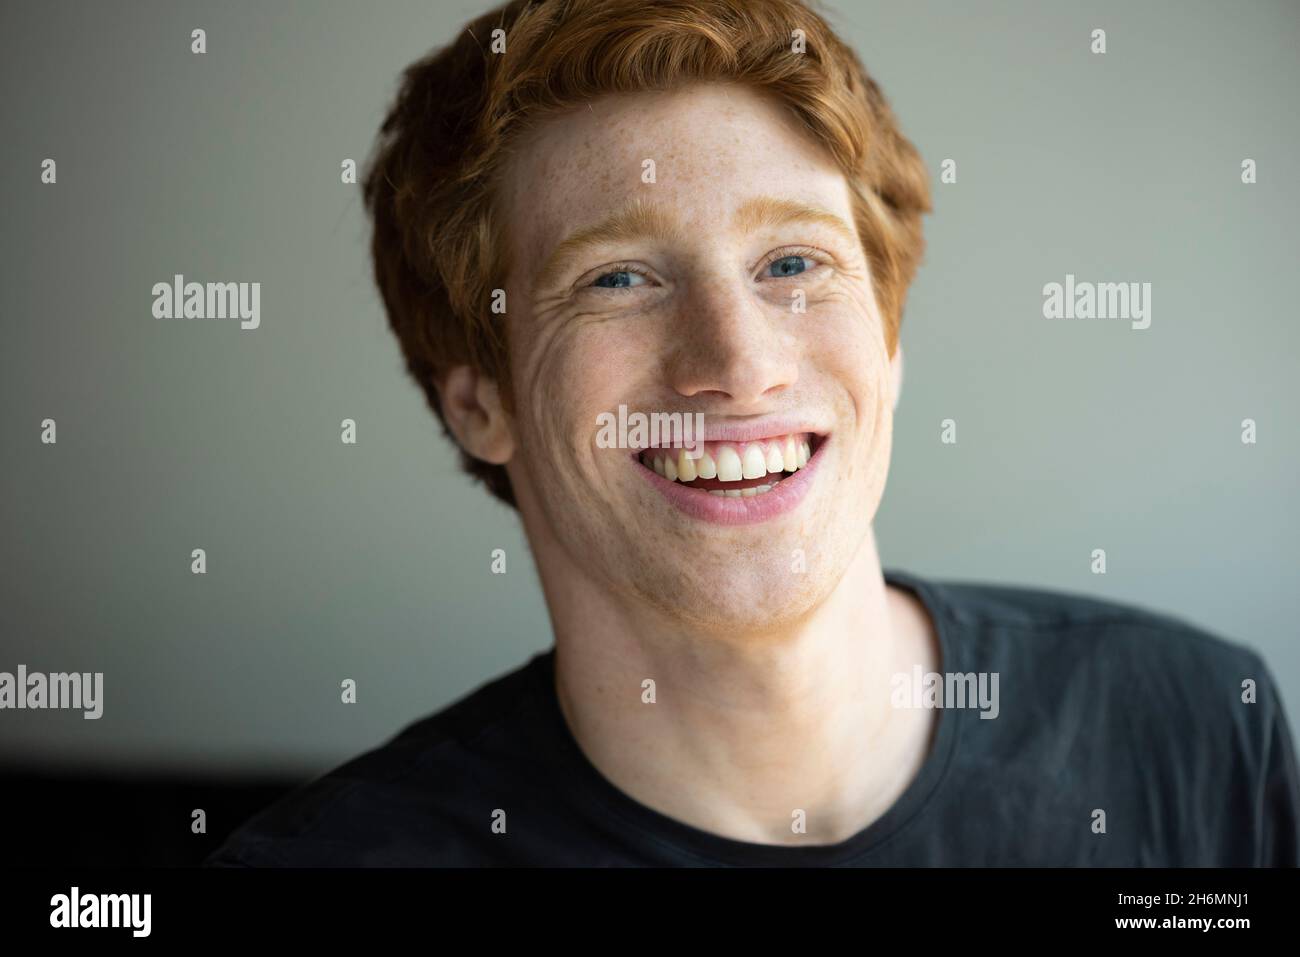 Portrait of smiling young man Stock Photo